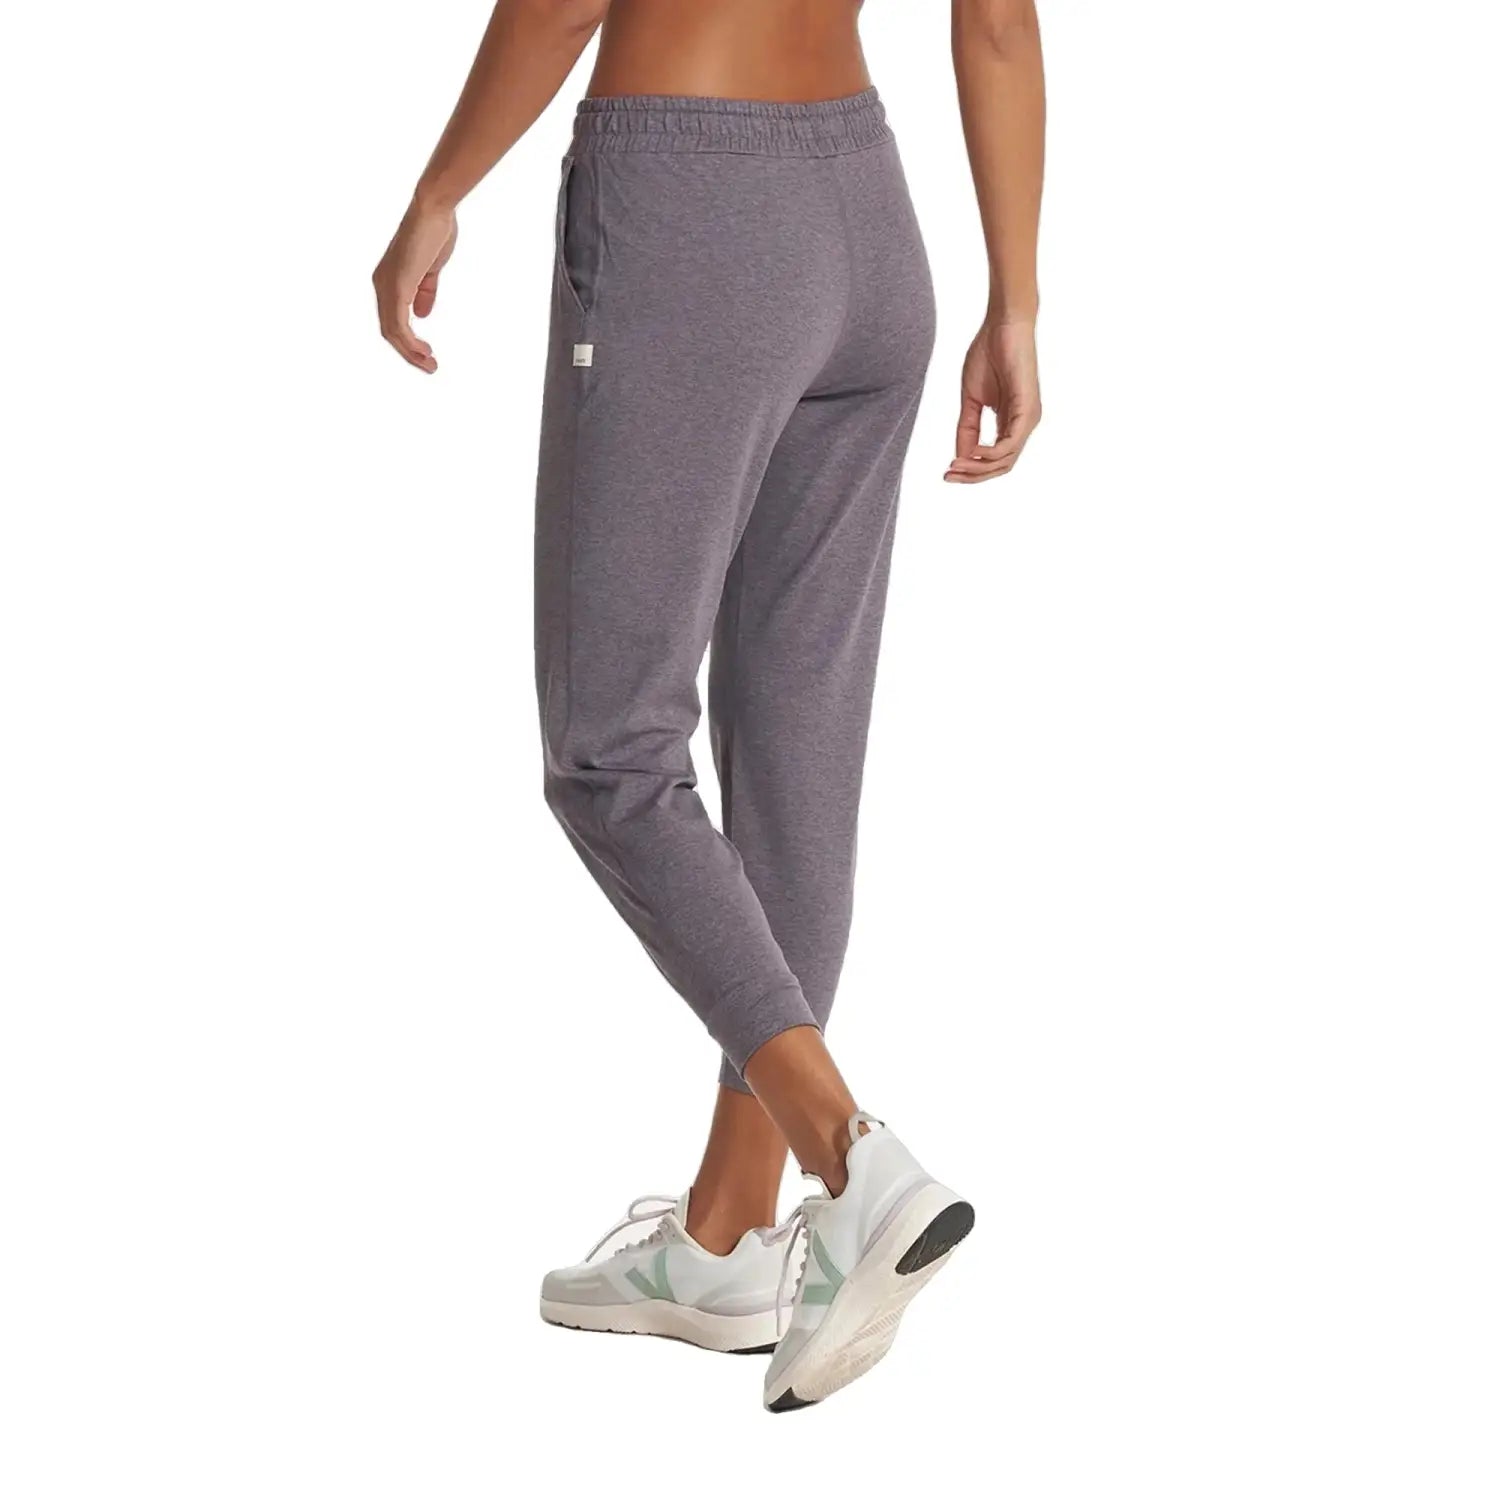 Vuori Women's Performance Jogger shown on model in Sawyer Heather, a purple heathered color. Back View.